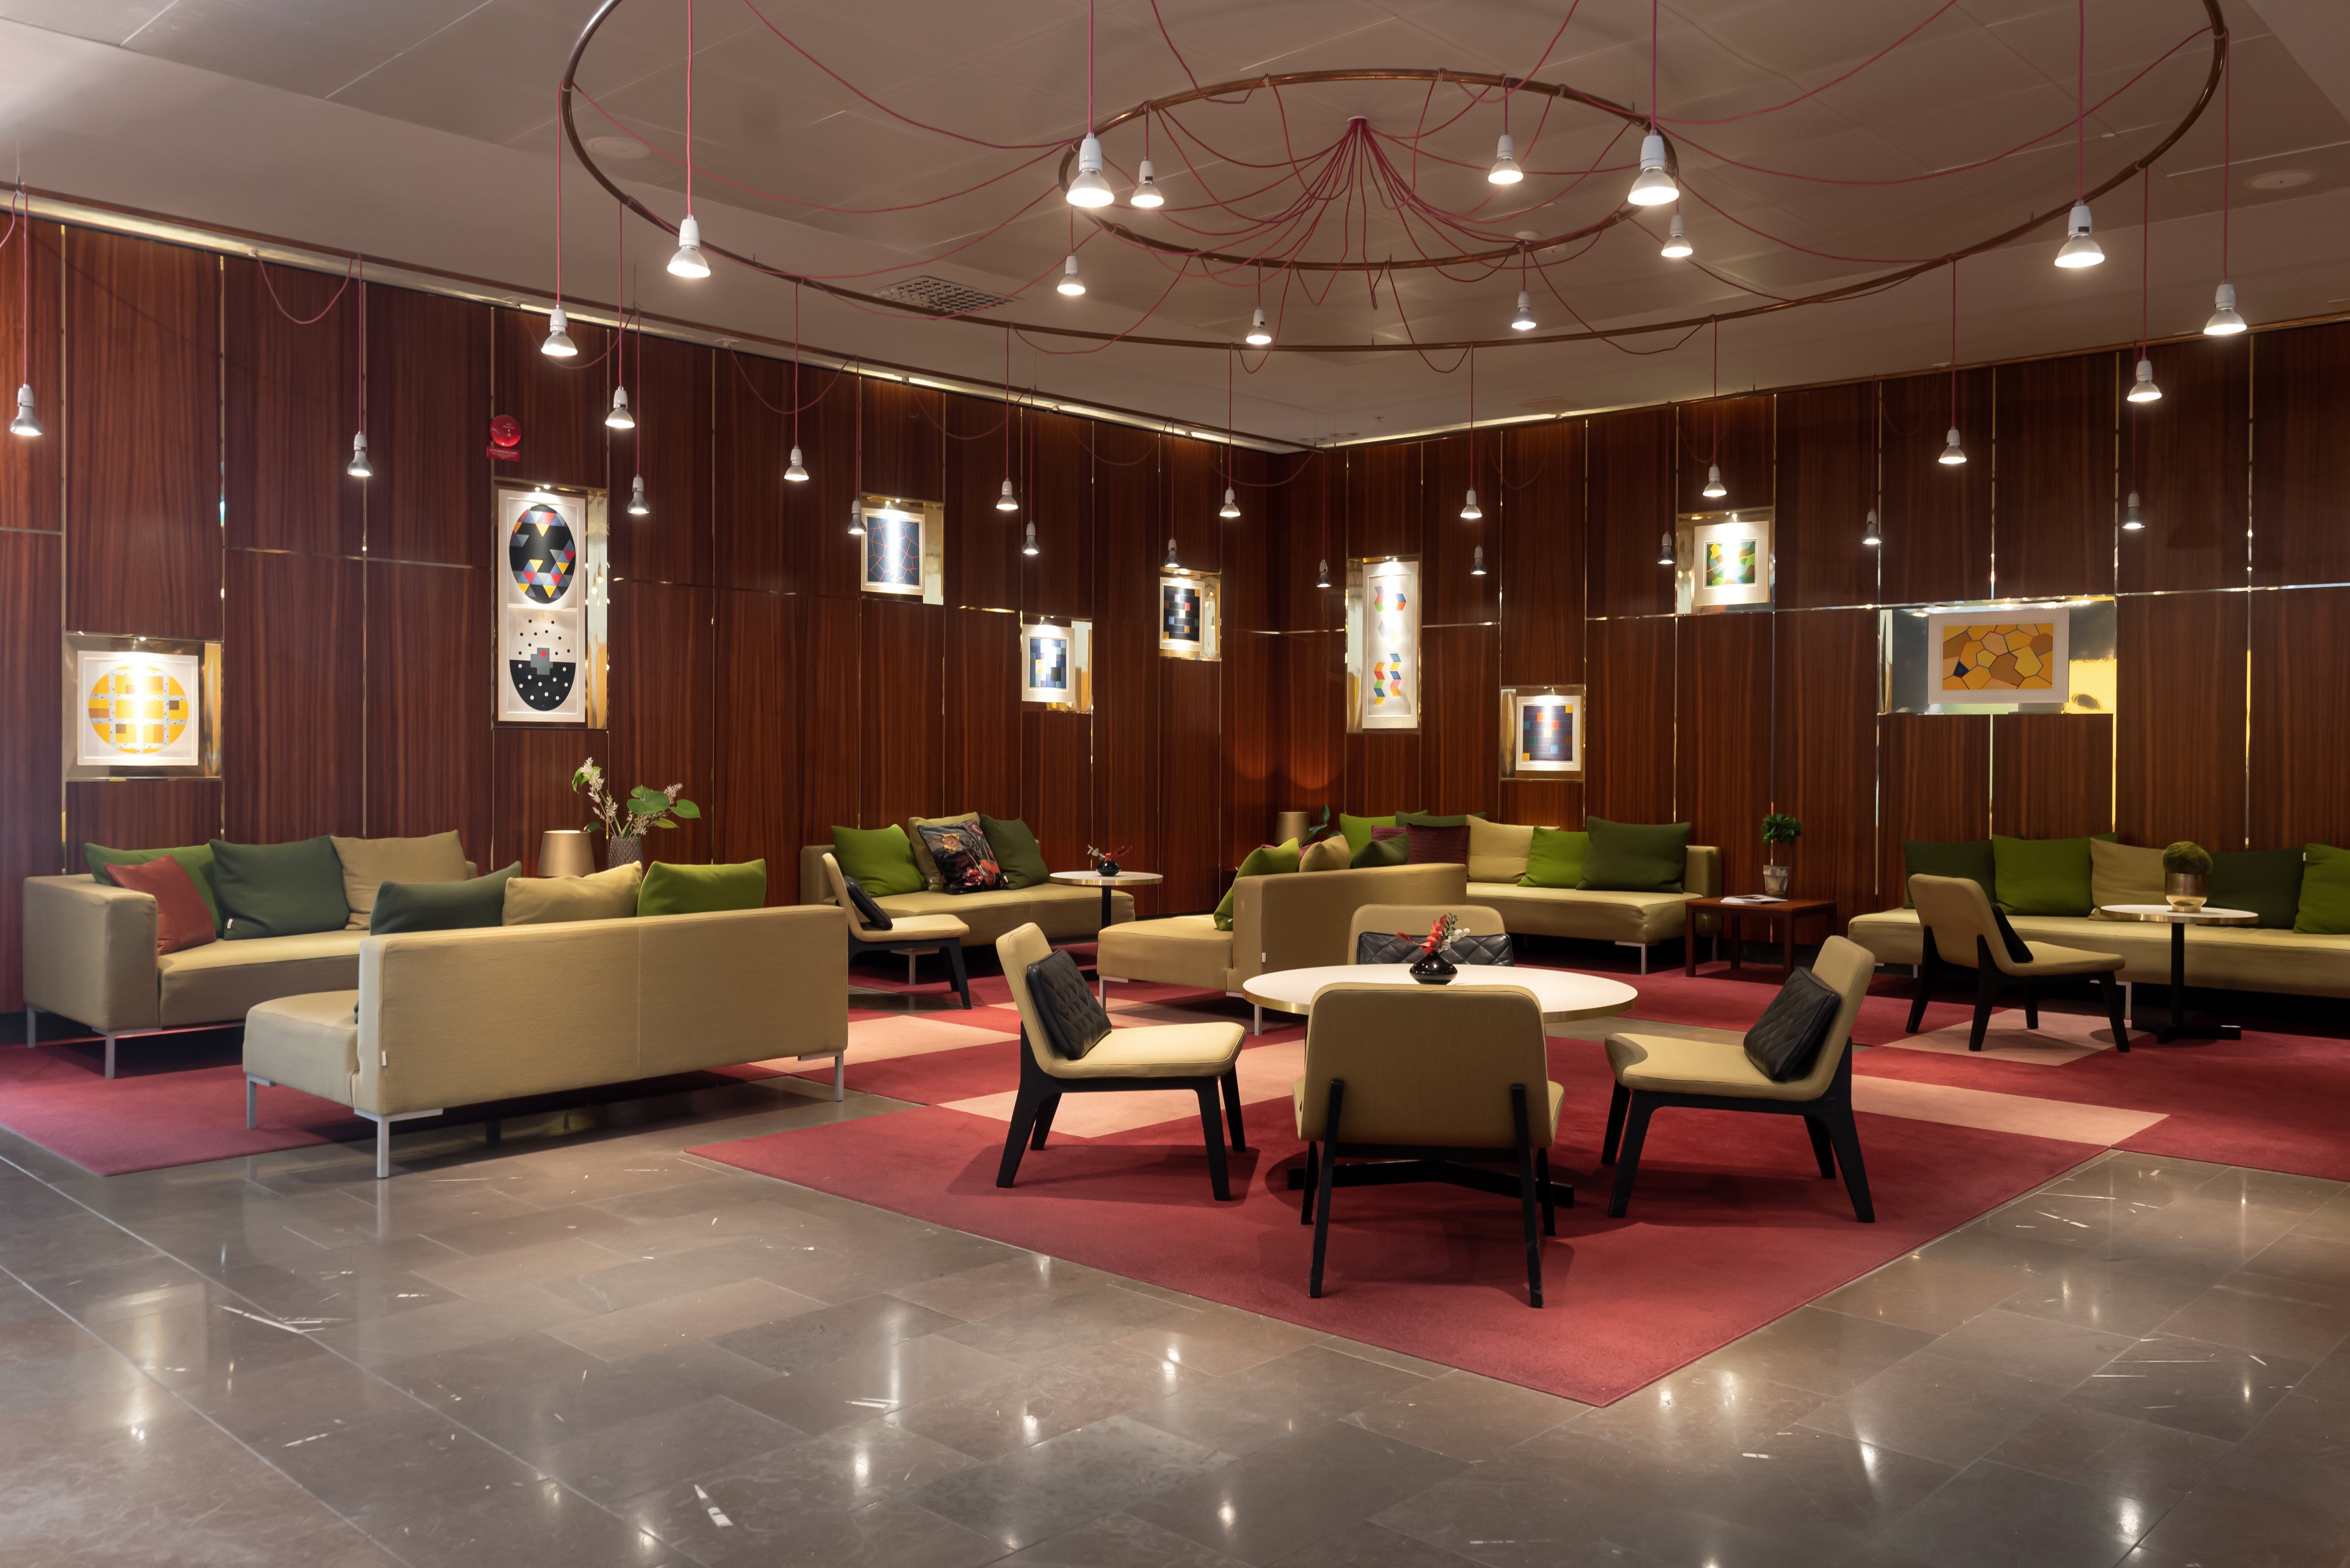 Hotel lobby with lounge furniture and large ceiling lamp